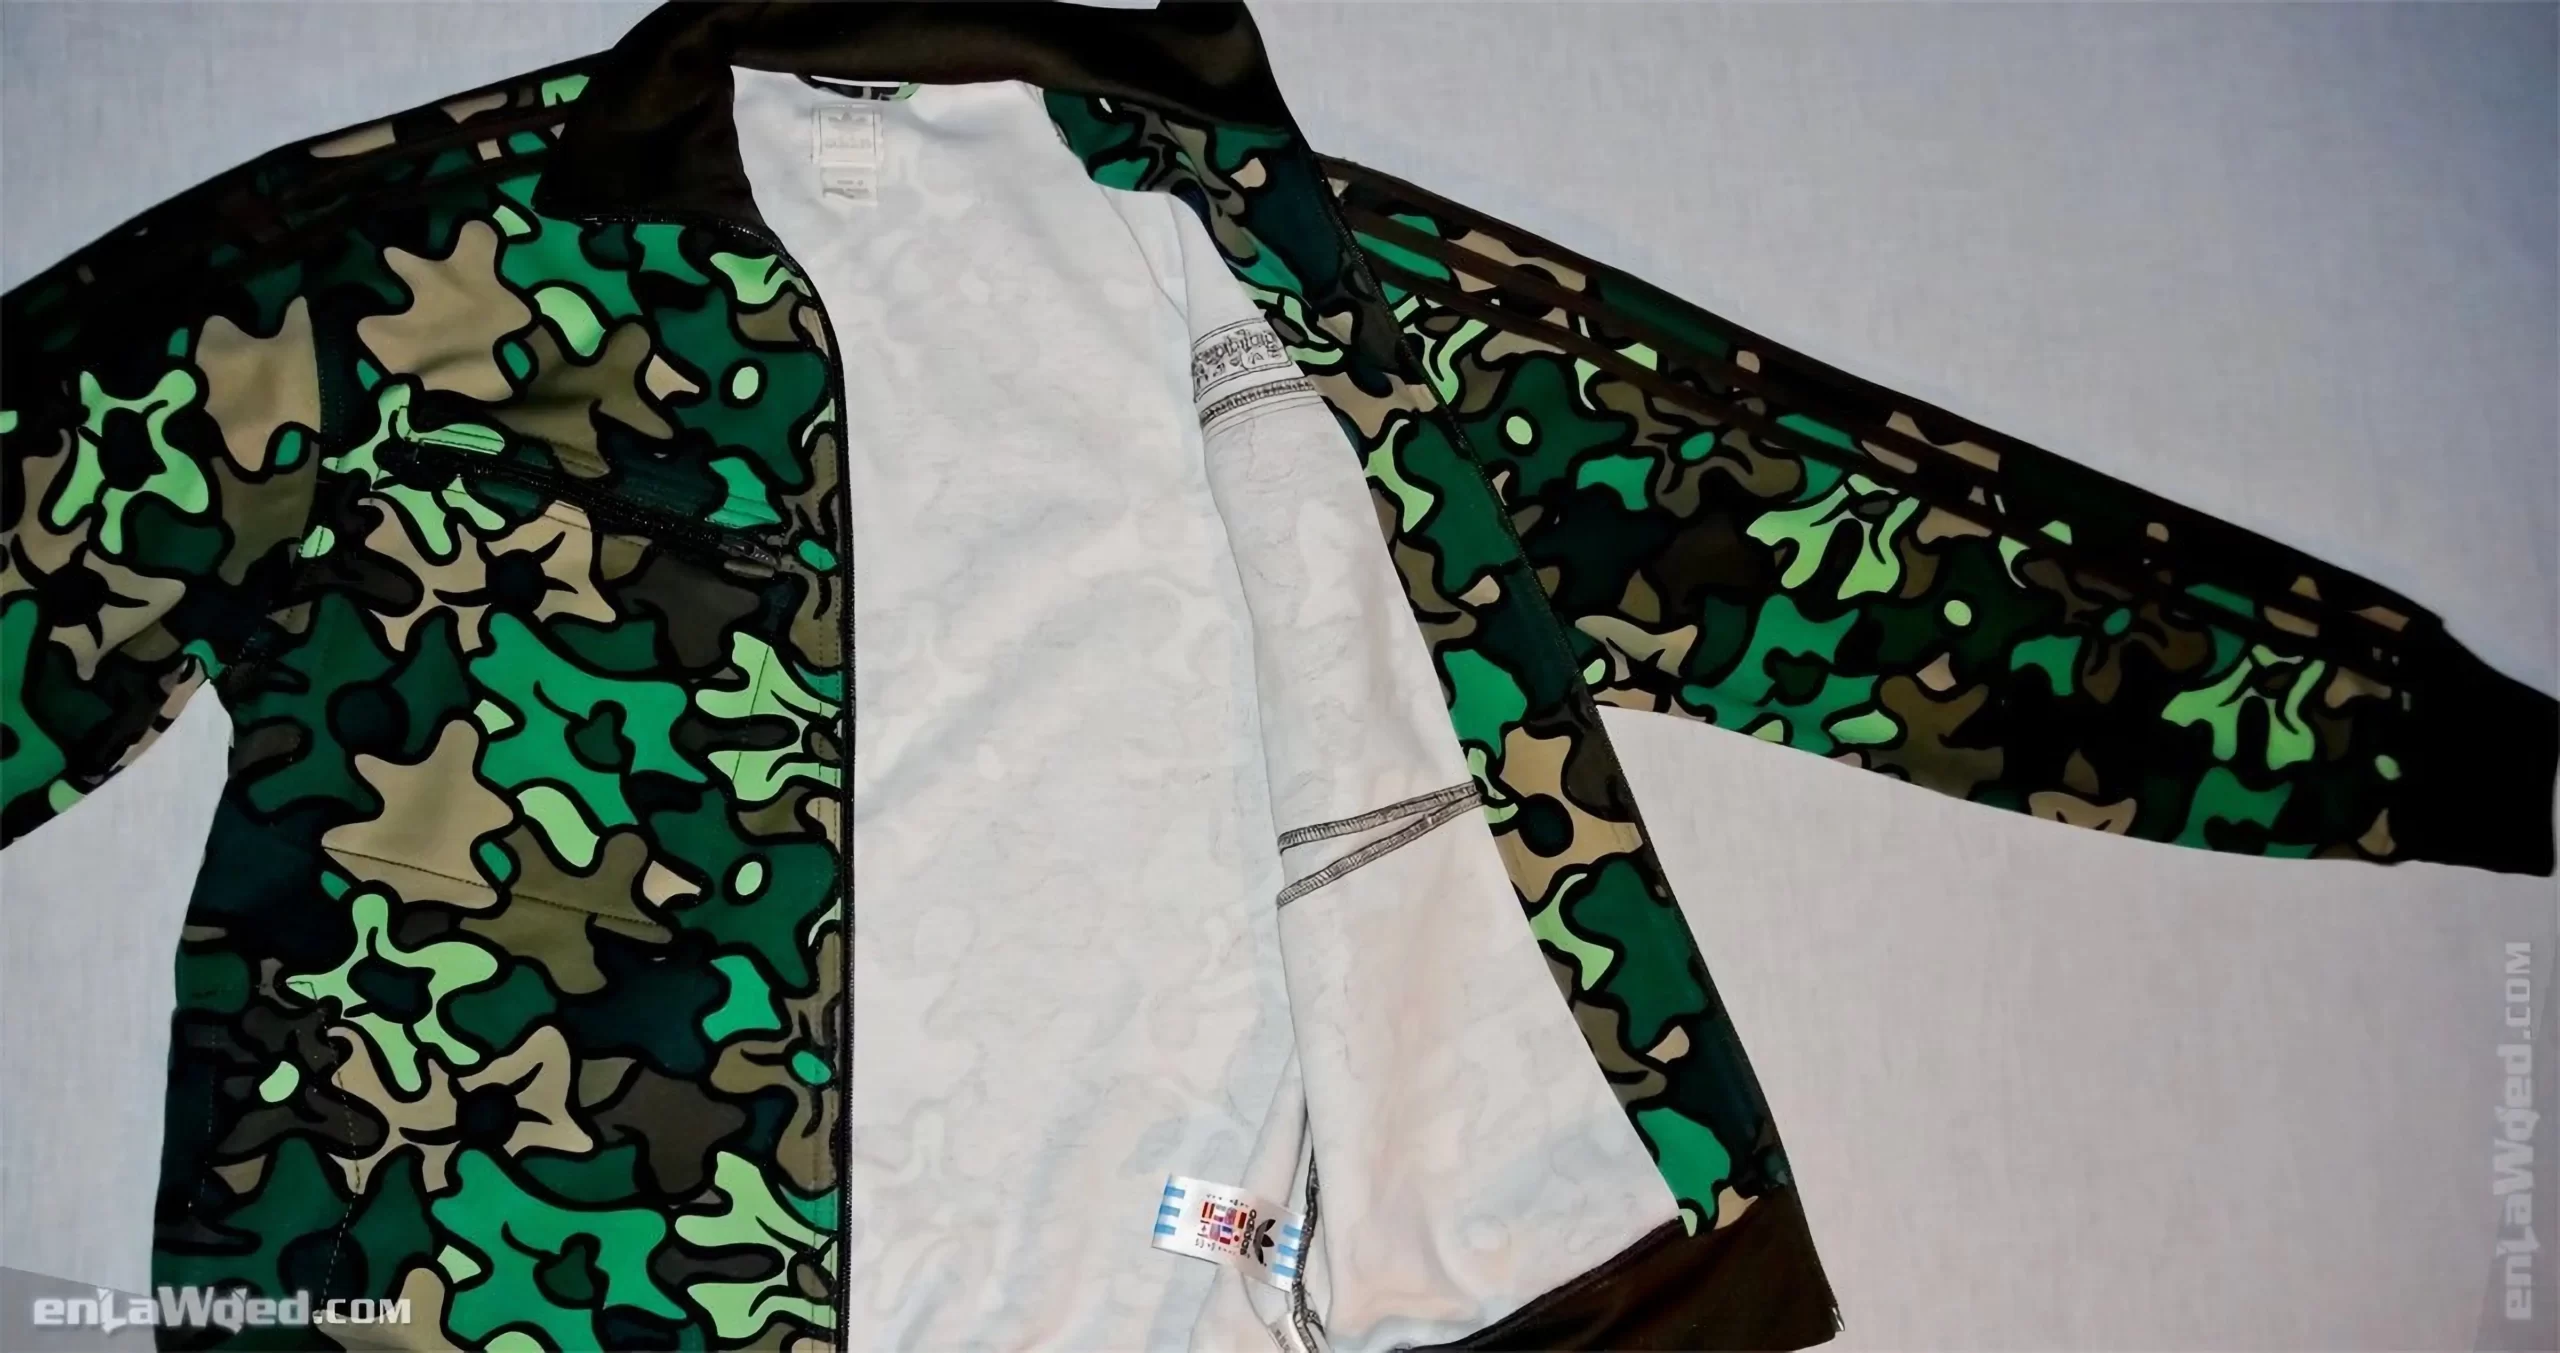 Men’s 2006 Adidas Originals Green Safety Camo Track Top: Resourceful (EnLawded.com file #lmchii6ds5g3nok1ts8)